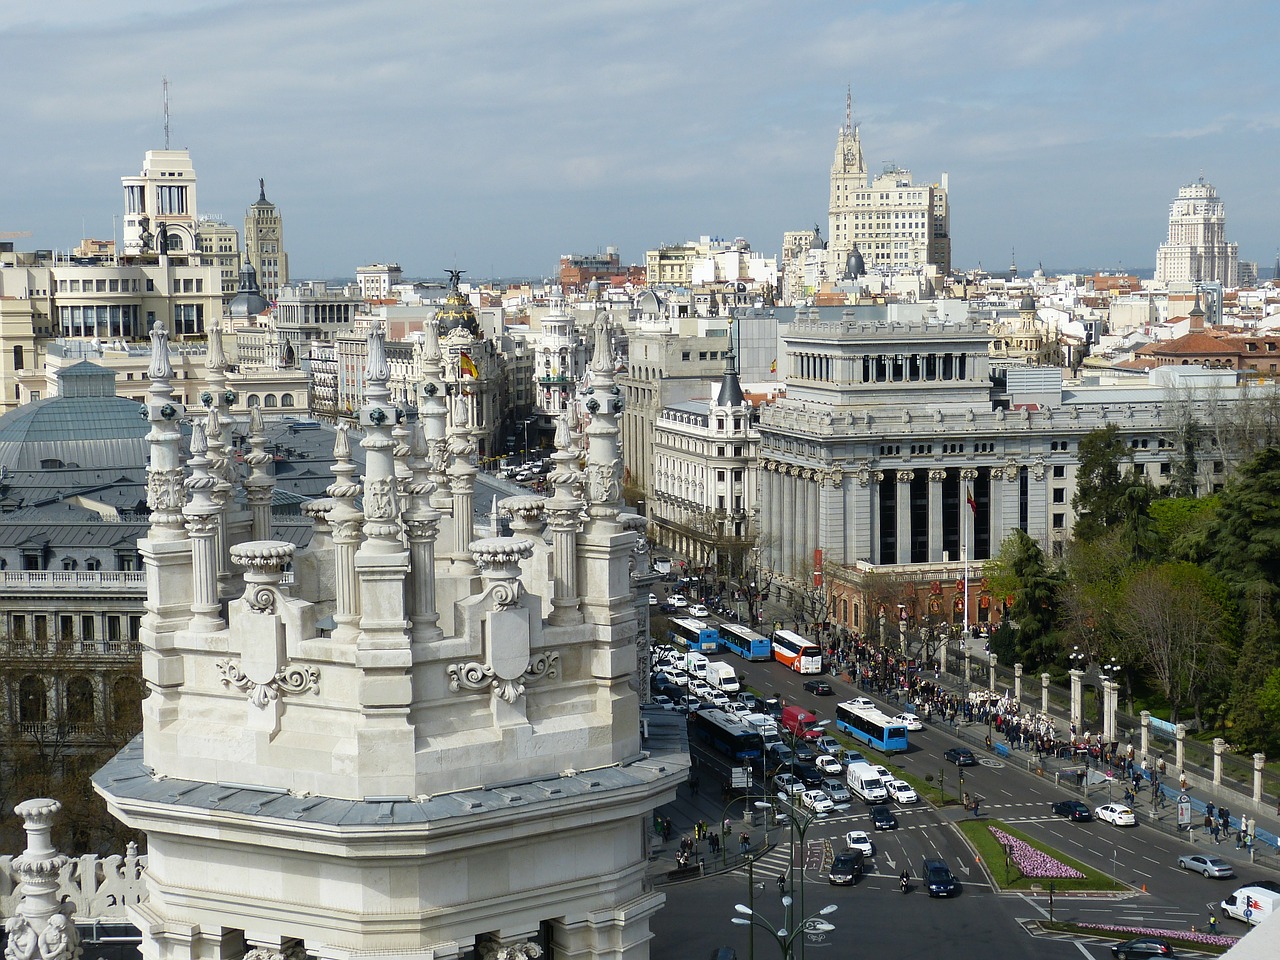 Madrid is a great place to avoid a drizzly autumn ... photo by CC user falco on pixabay